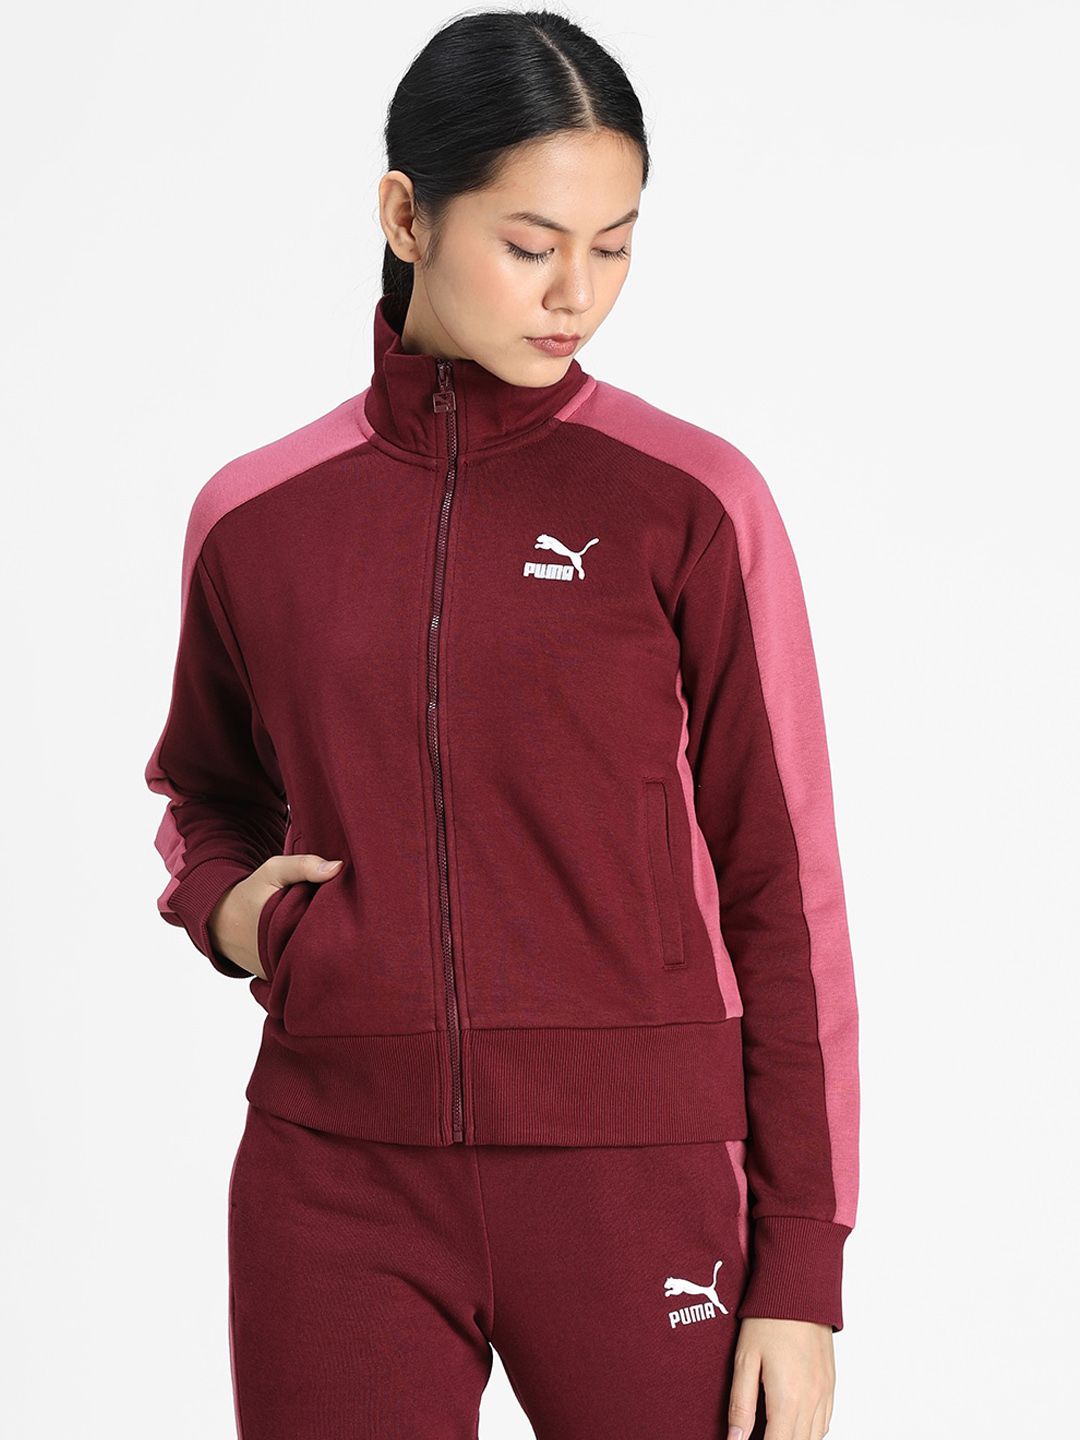 Puma Women Maroon Solid Sporty Jacket Price in India